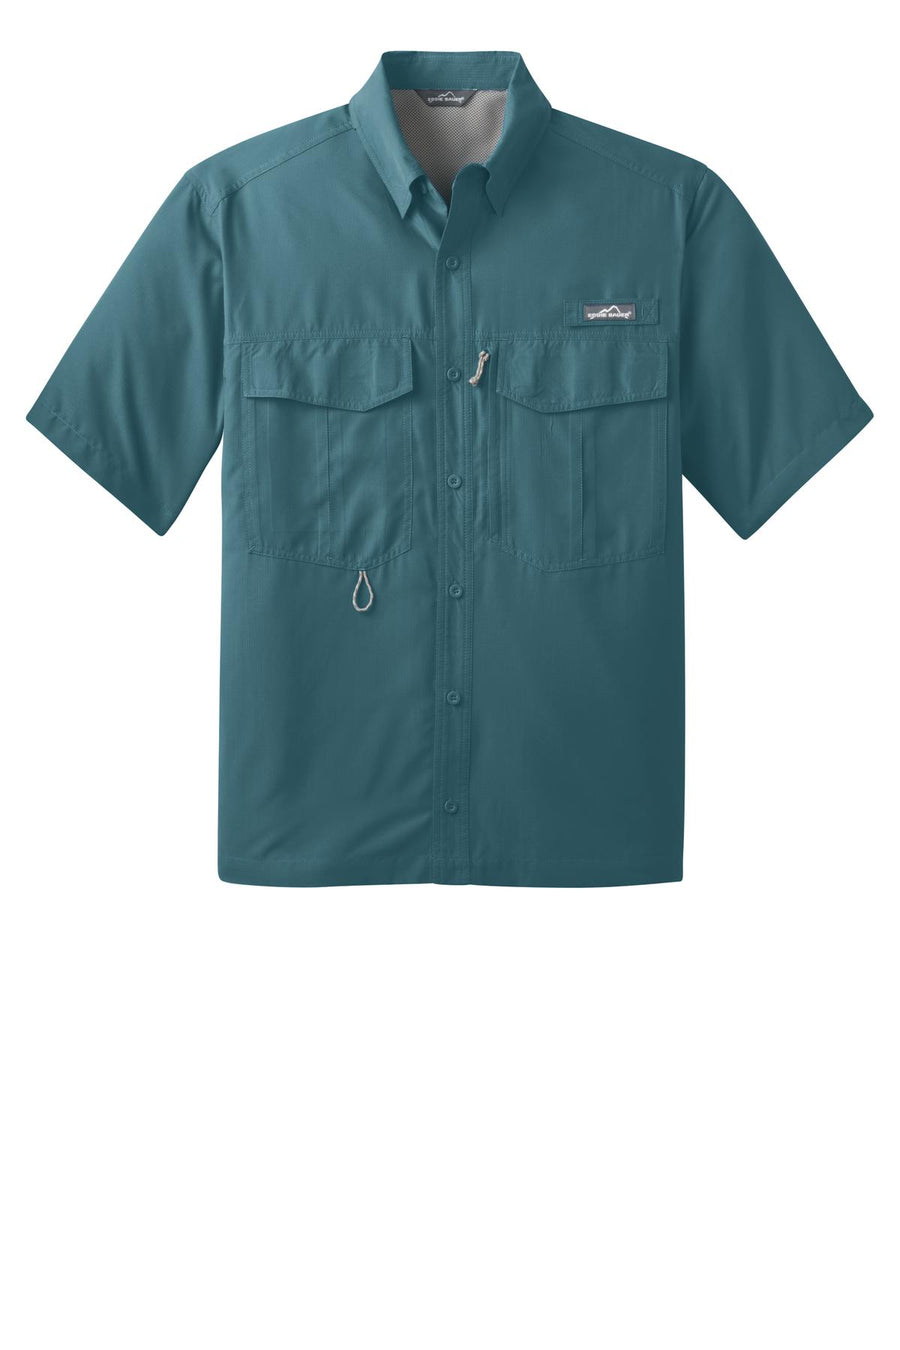 EB602-Gulf Teal-front_flat